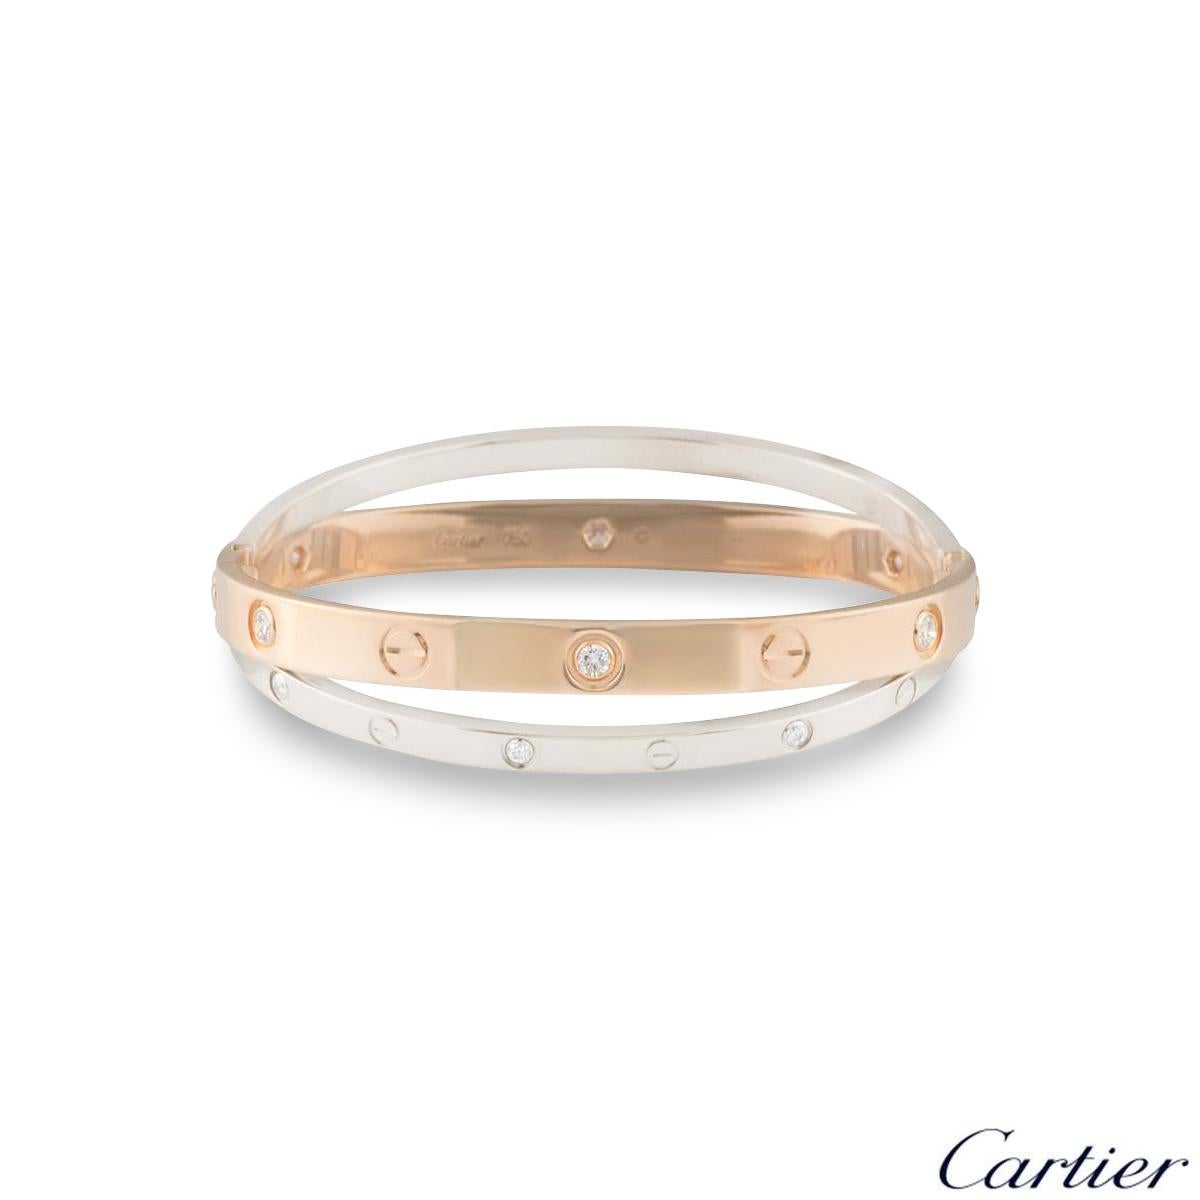 An 18k double rose and white gold diamond bangle by Cartier from the Love collection. The rose gold bangle is set with 6 round brilliant cut diamonds and alternating screw motifs, interlinking with it is a white gold band on either side also